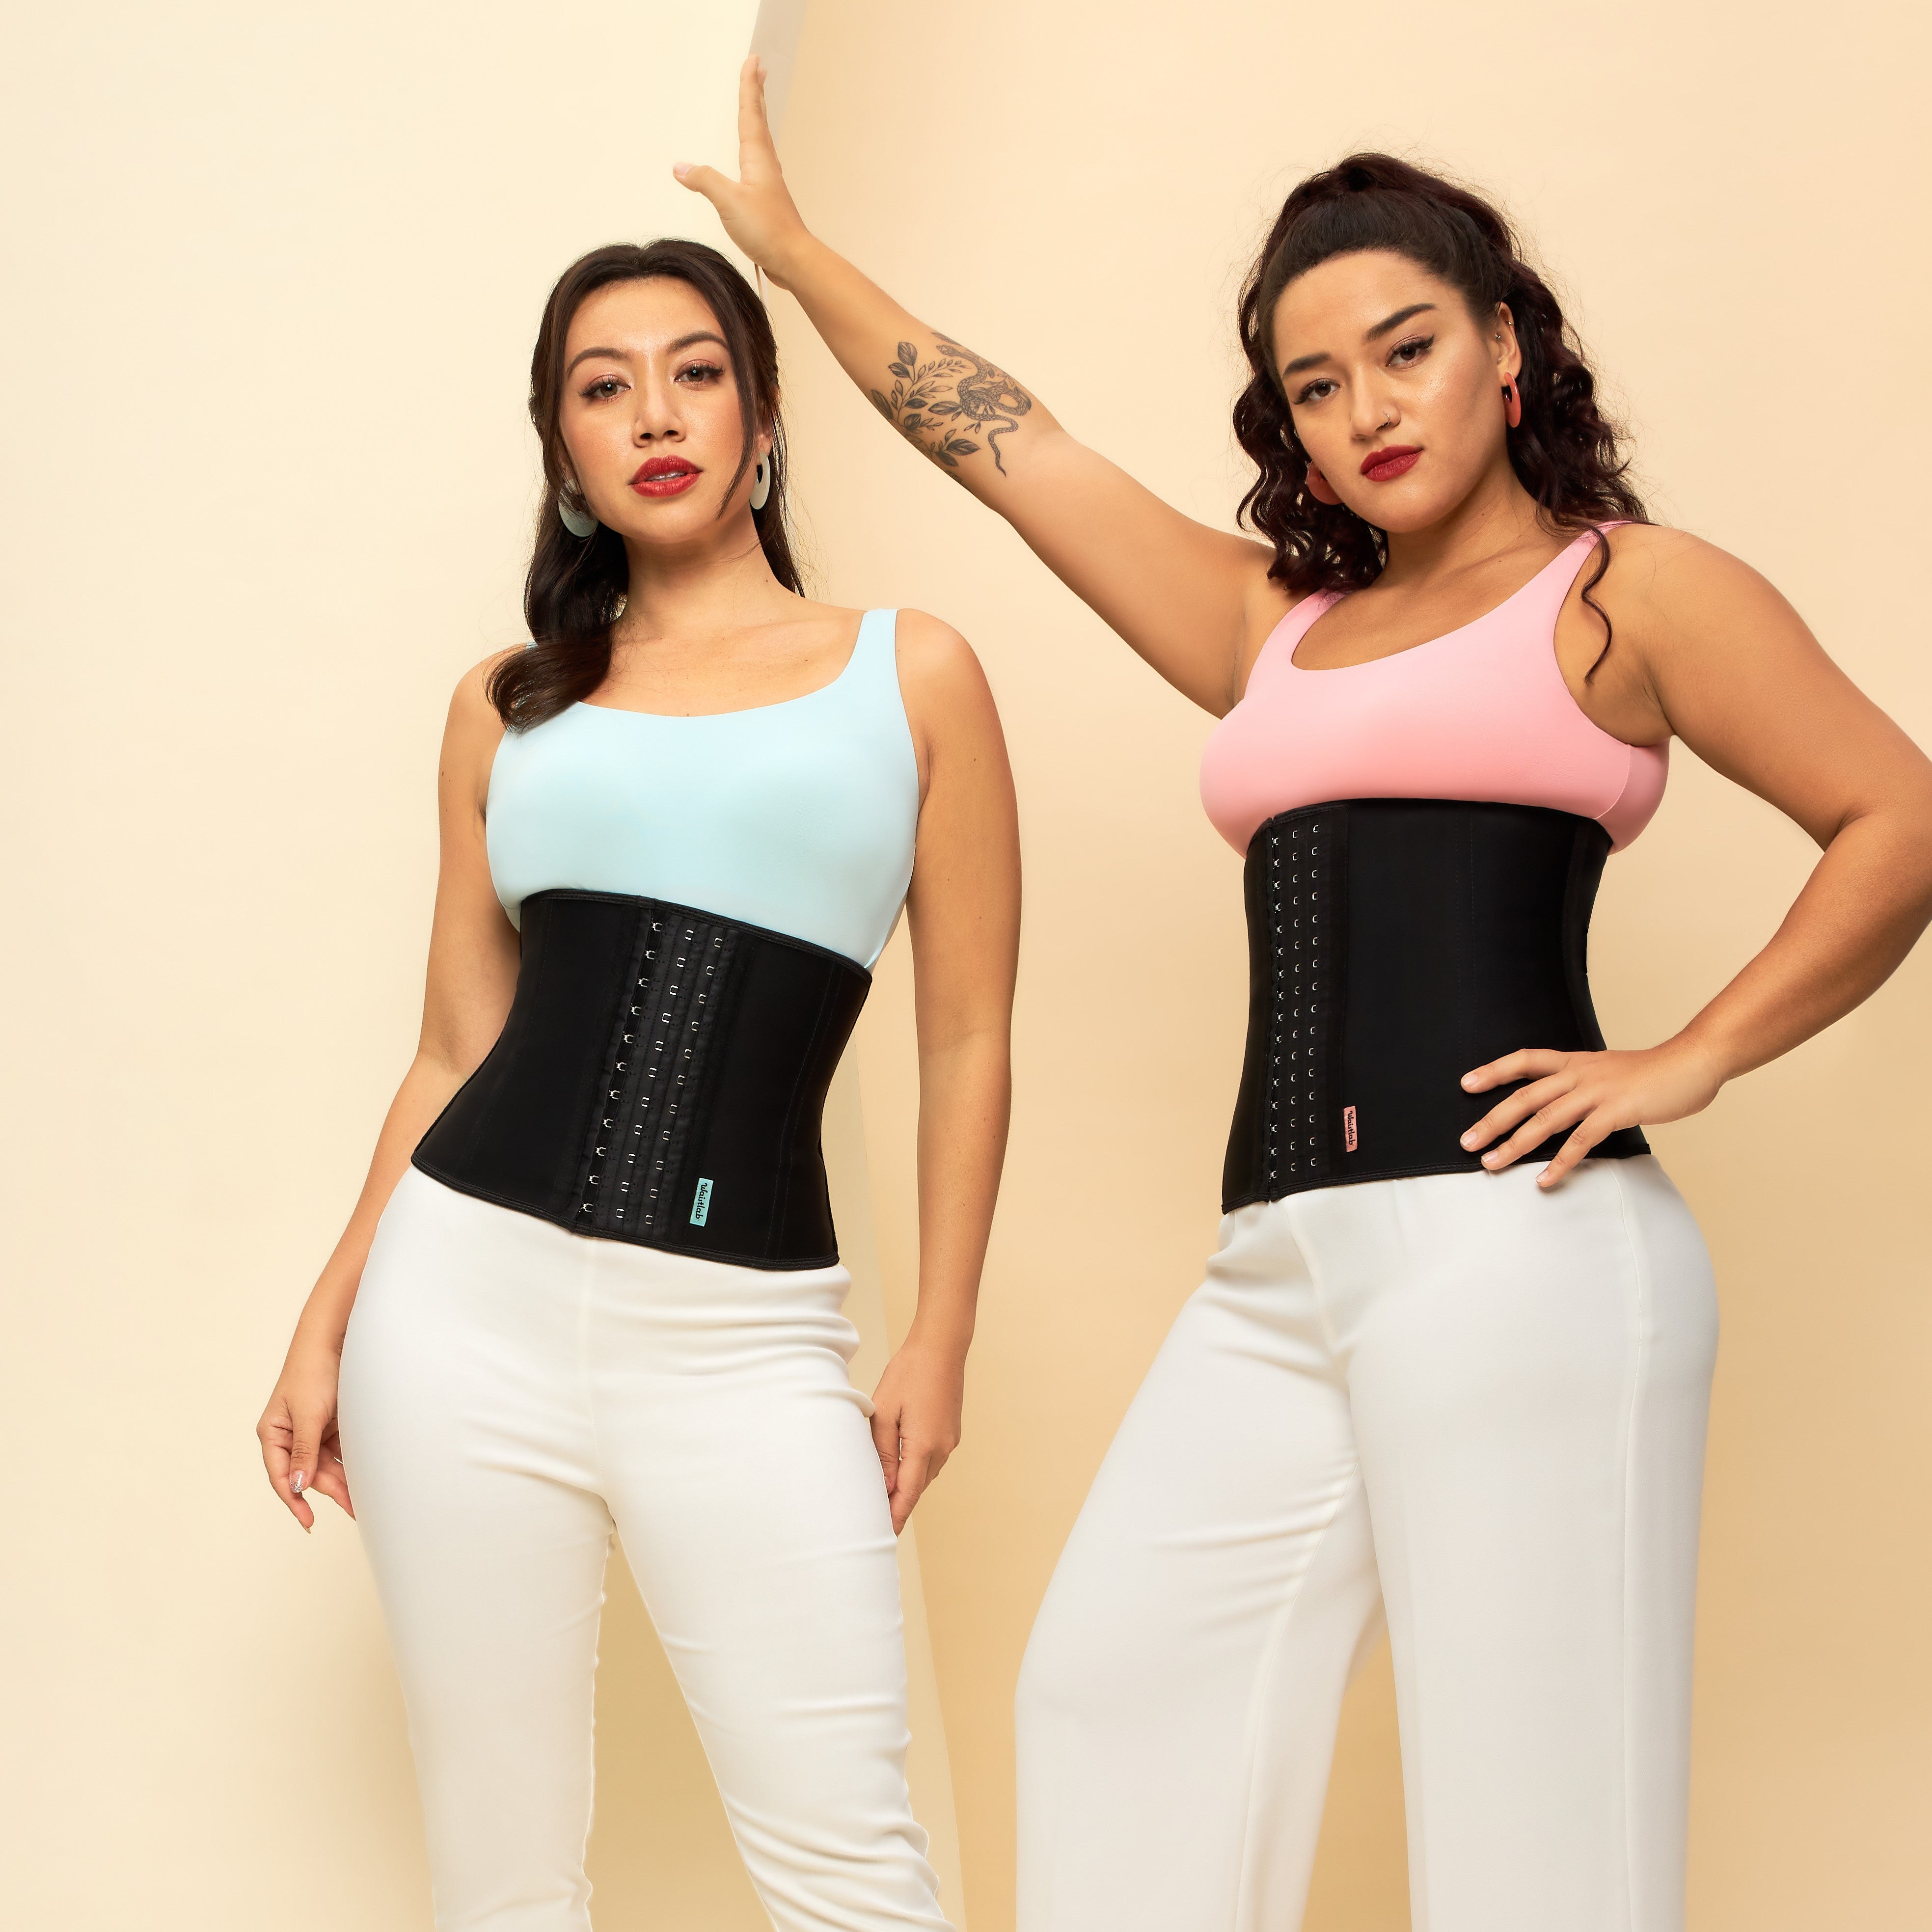 A Complete Guide to Waist Trainers, Waist Cinchers, Waist Trimmers